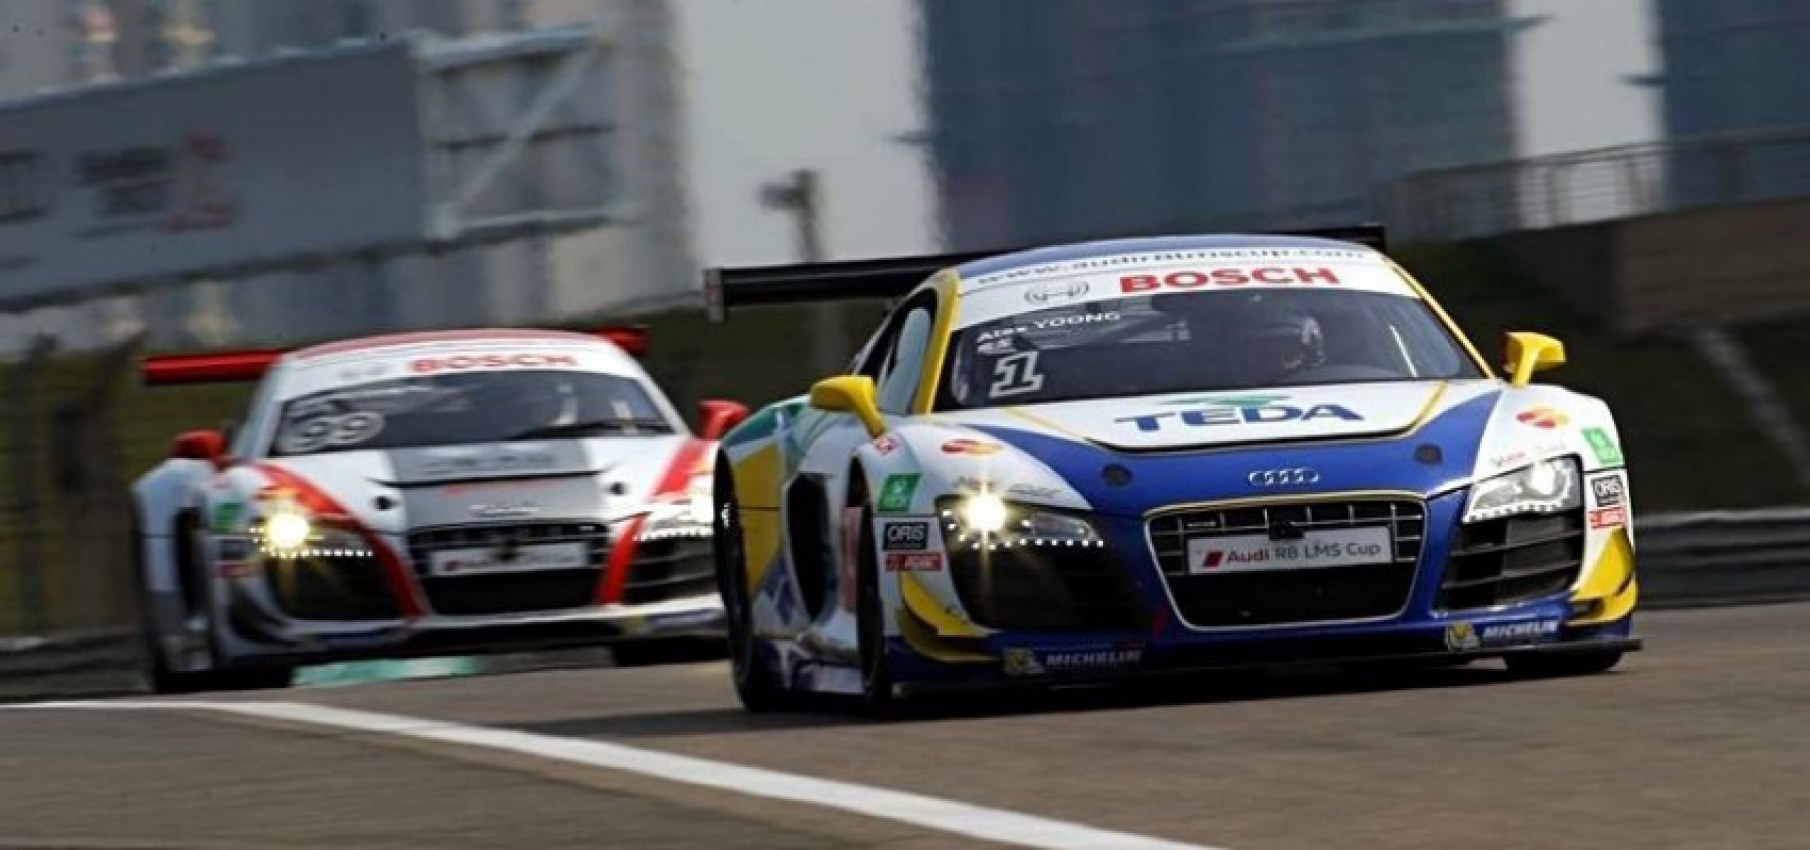 autos, cars, reviews, alex yoong, audi, audi r8 lms cup, insights, r8, racing, shanghai, champyoong - by alex yoong